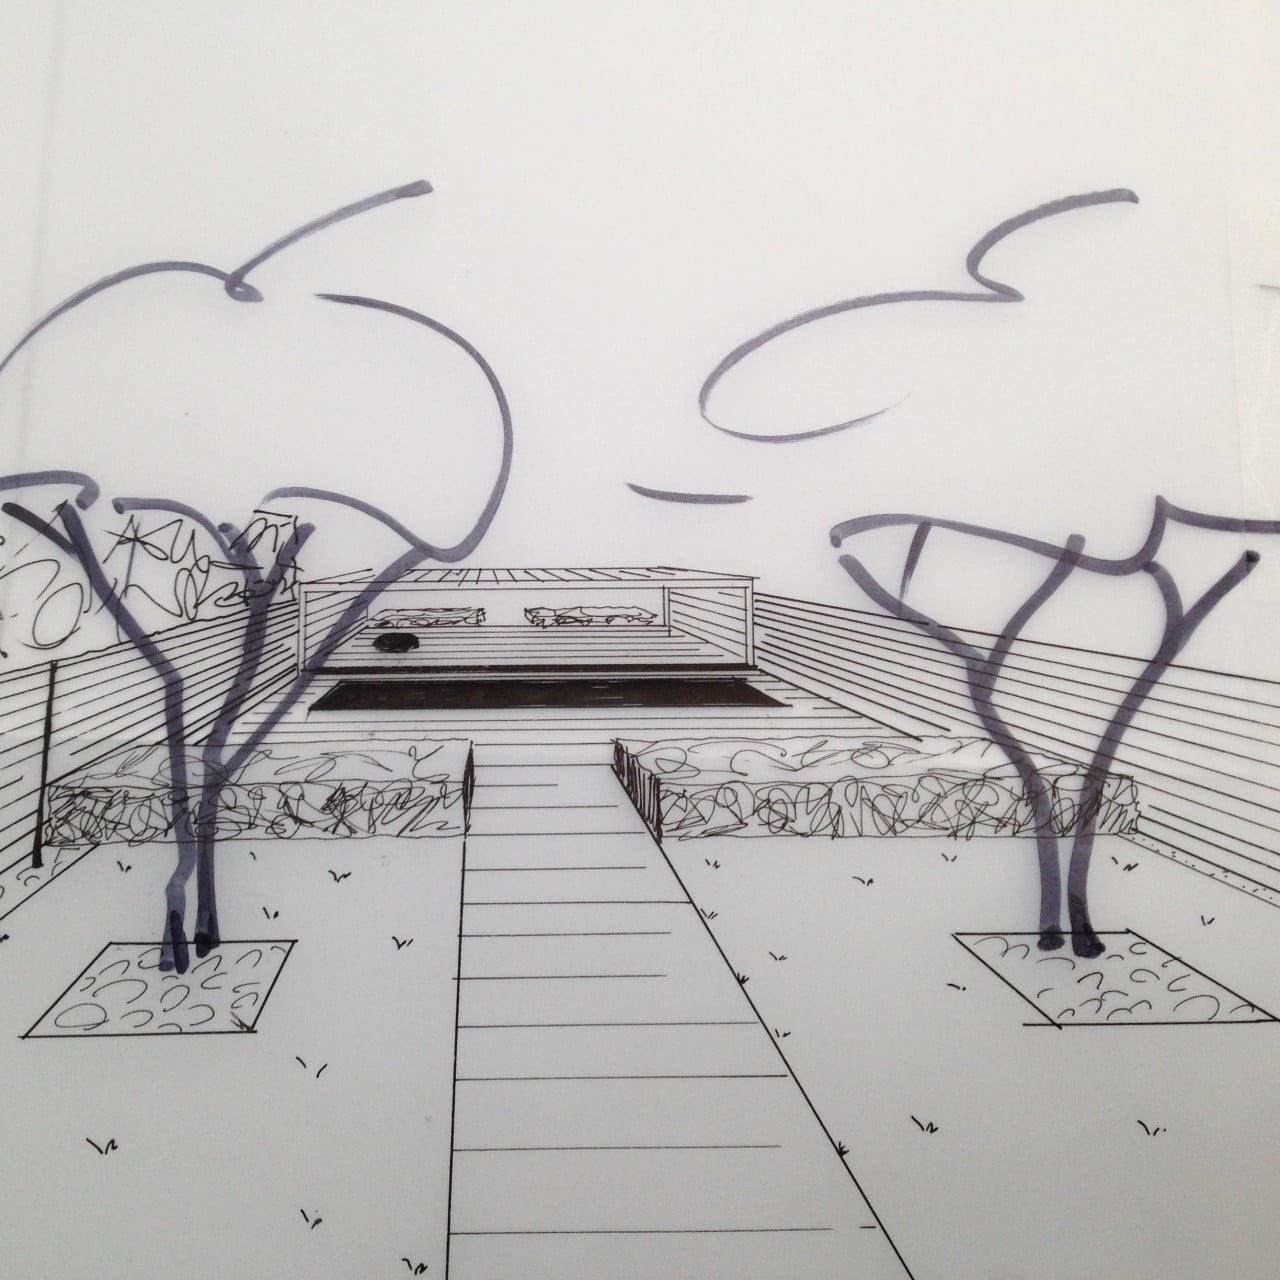 this is my original 3d style drawing of this contemporary garden with swimming pool & modern styling